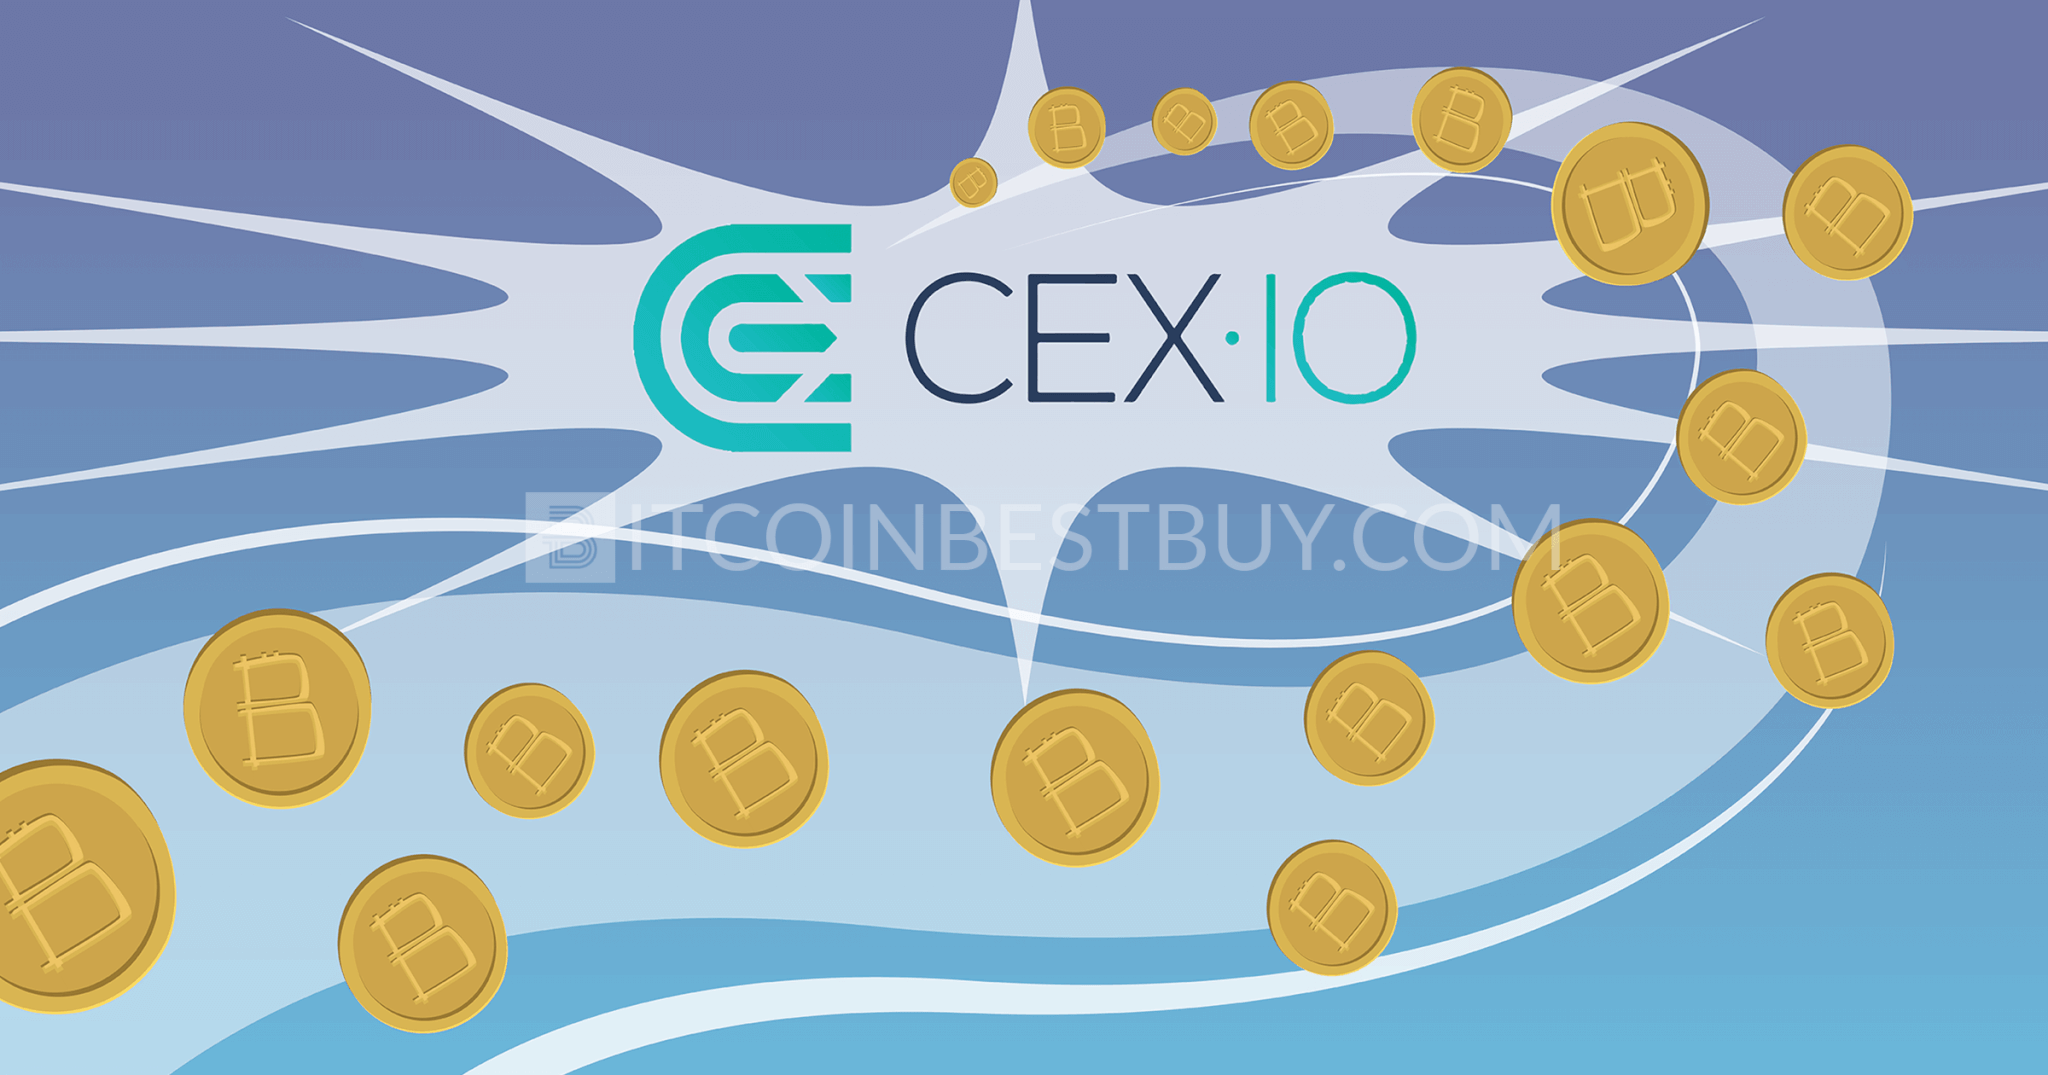 Cex Io Bitcoin Exchange Review Payment Methods Security Privacy Fees Limits And Buying Tutorial Bitcoinbestbuy